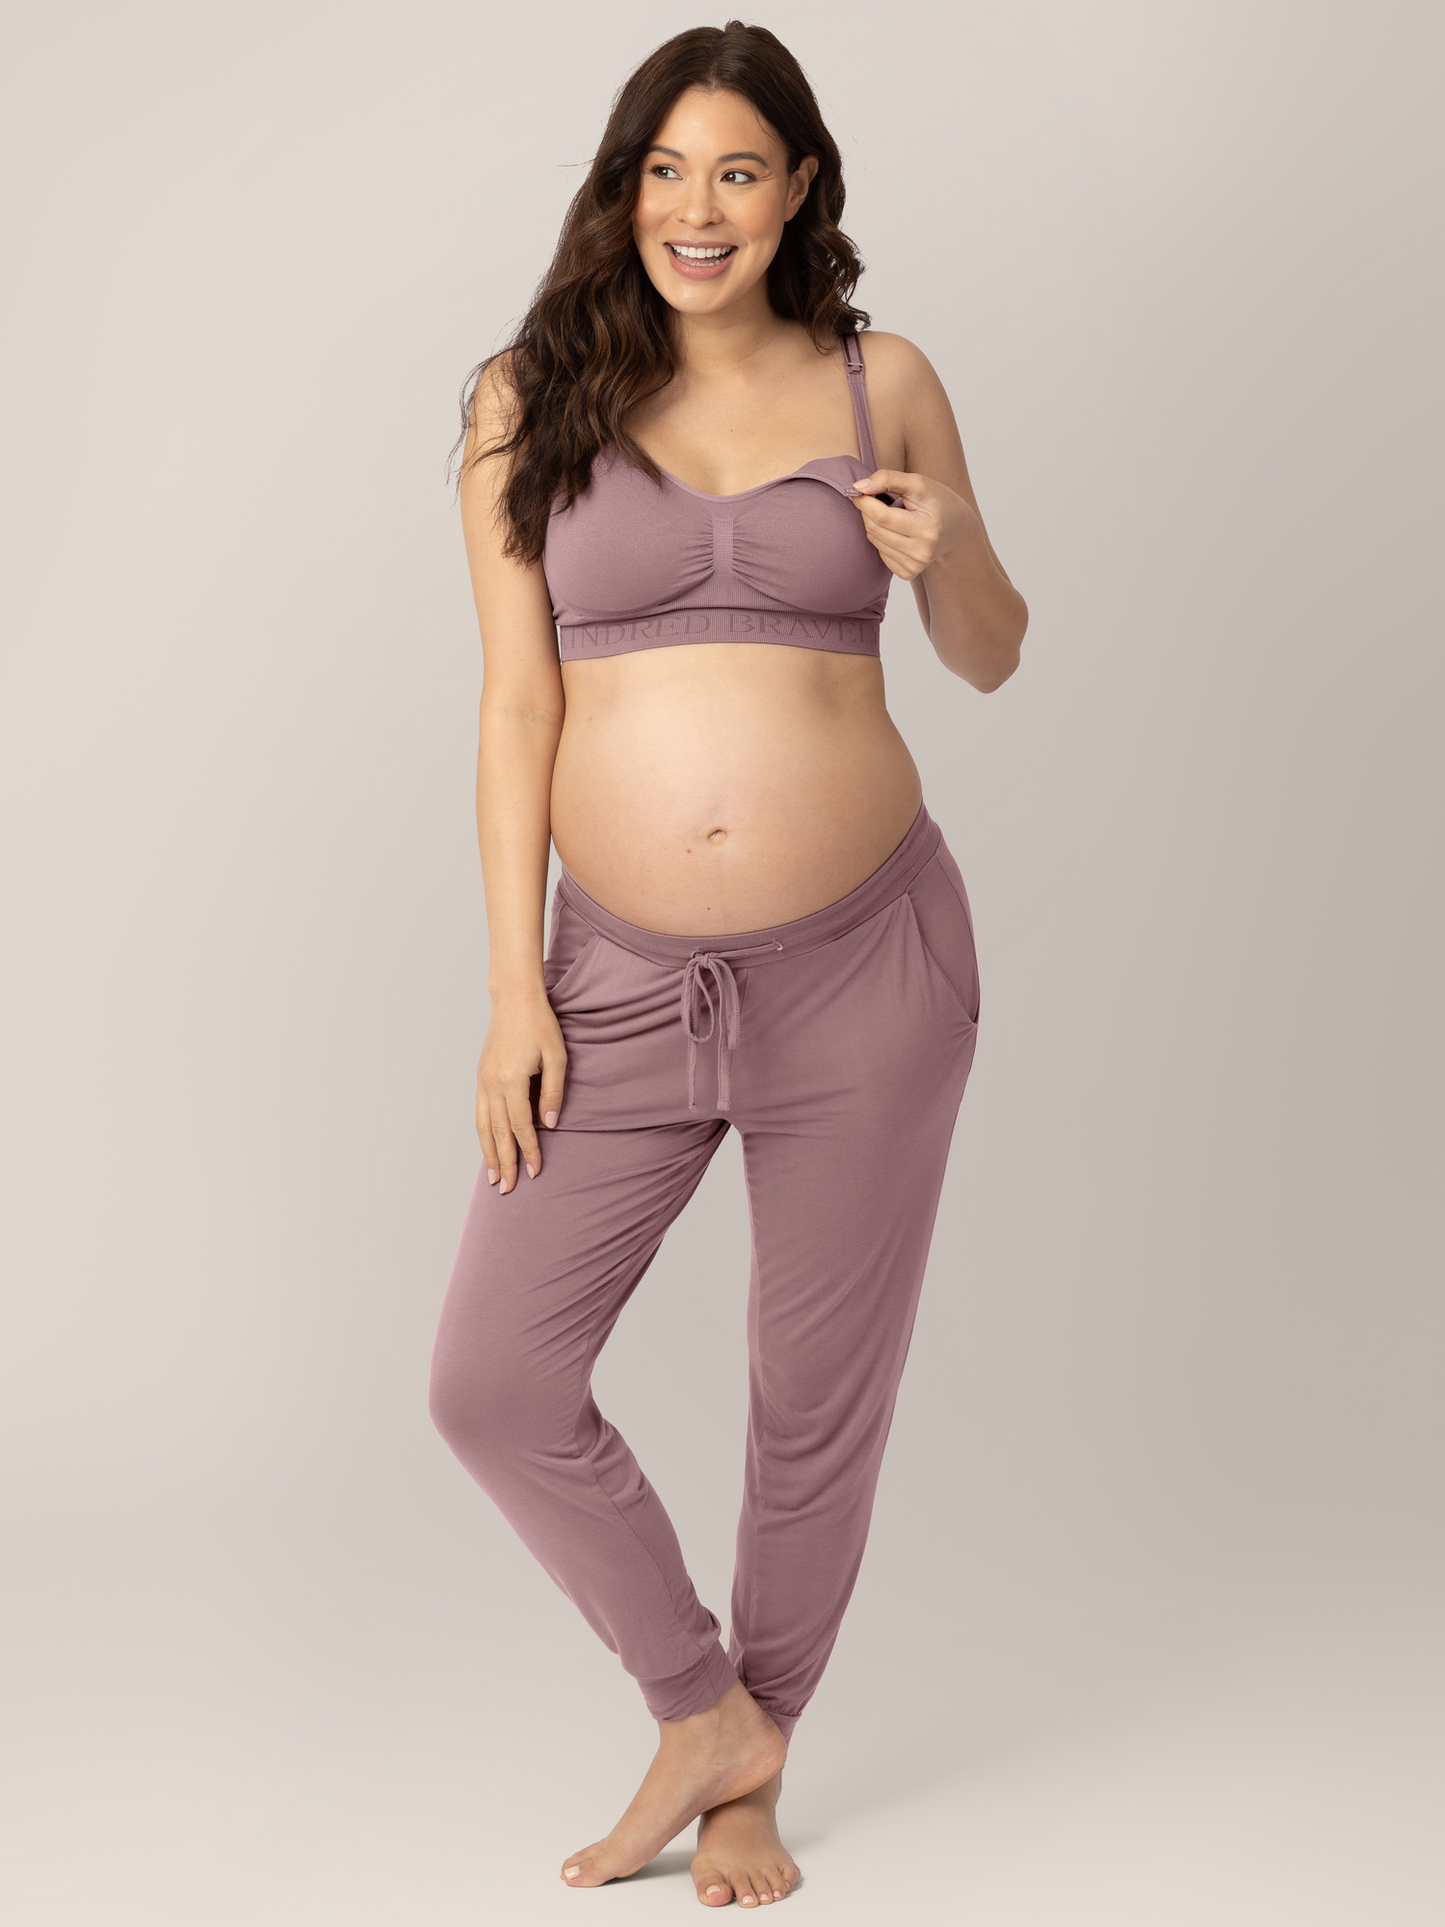 Model wearing the Simply Sublime® Nursing Bra in Twilight showing the easy clip down nursing access.